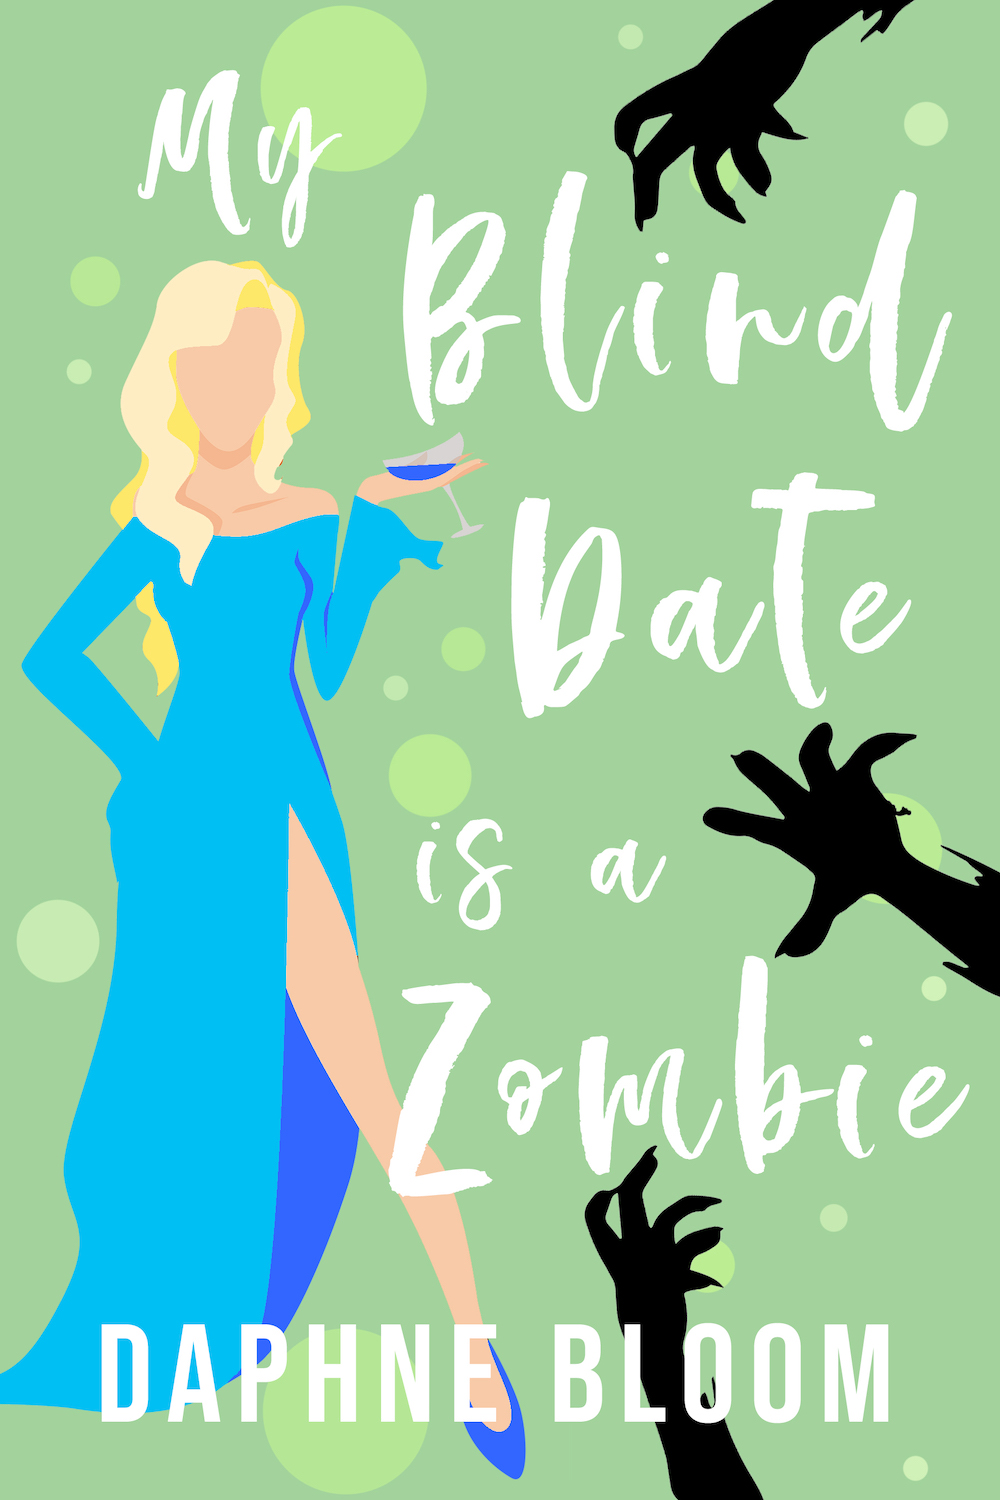 Blind Date Zombie